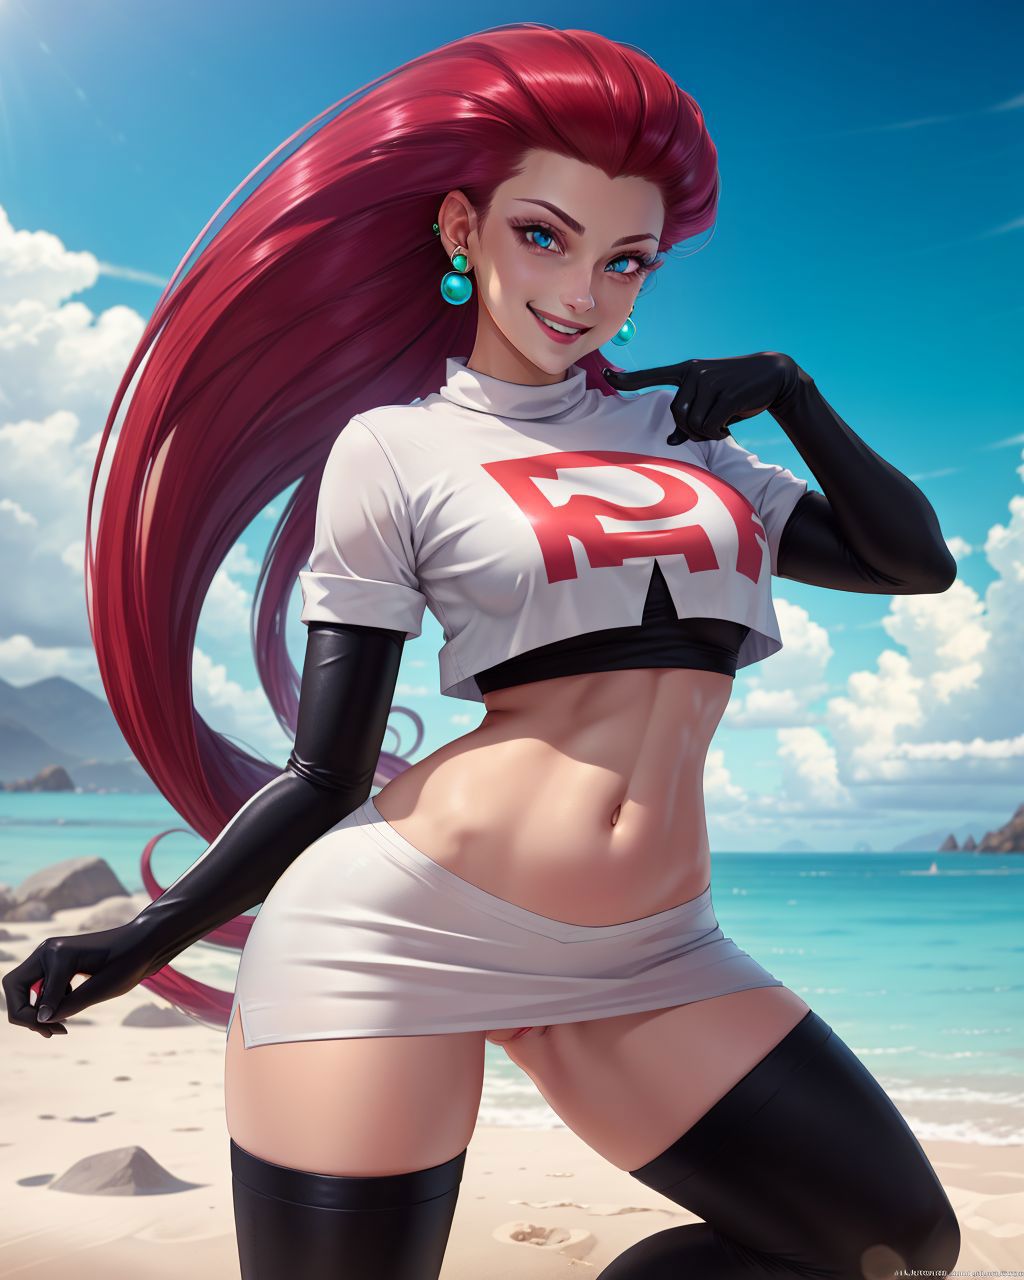 A cartoon woman in a white and red shirt poses near the ocean.